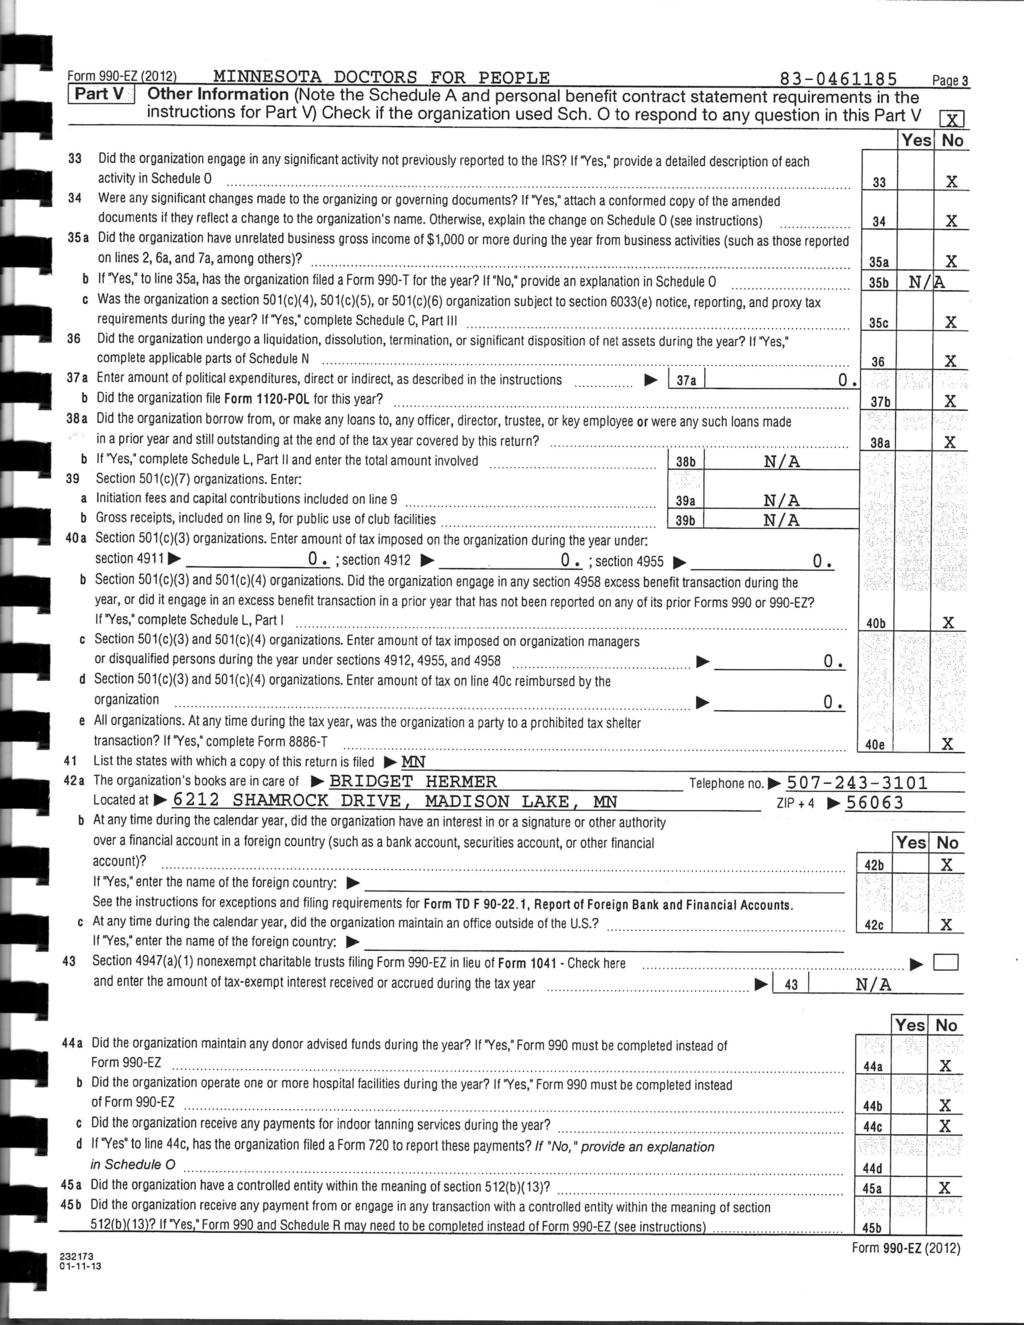 Form 990-EZ (2012) MINNESOTA DOCTORS FOR PEOPLE 83-0461185 Page 3 Part V j Other Information (Note the Schedule A and personal benefit contract statement requirements in the instructions for Part V)